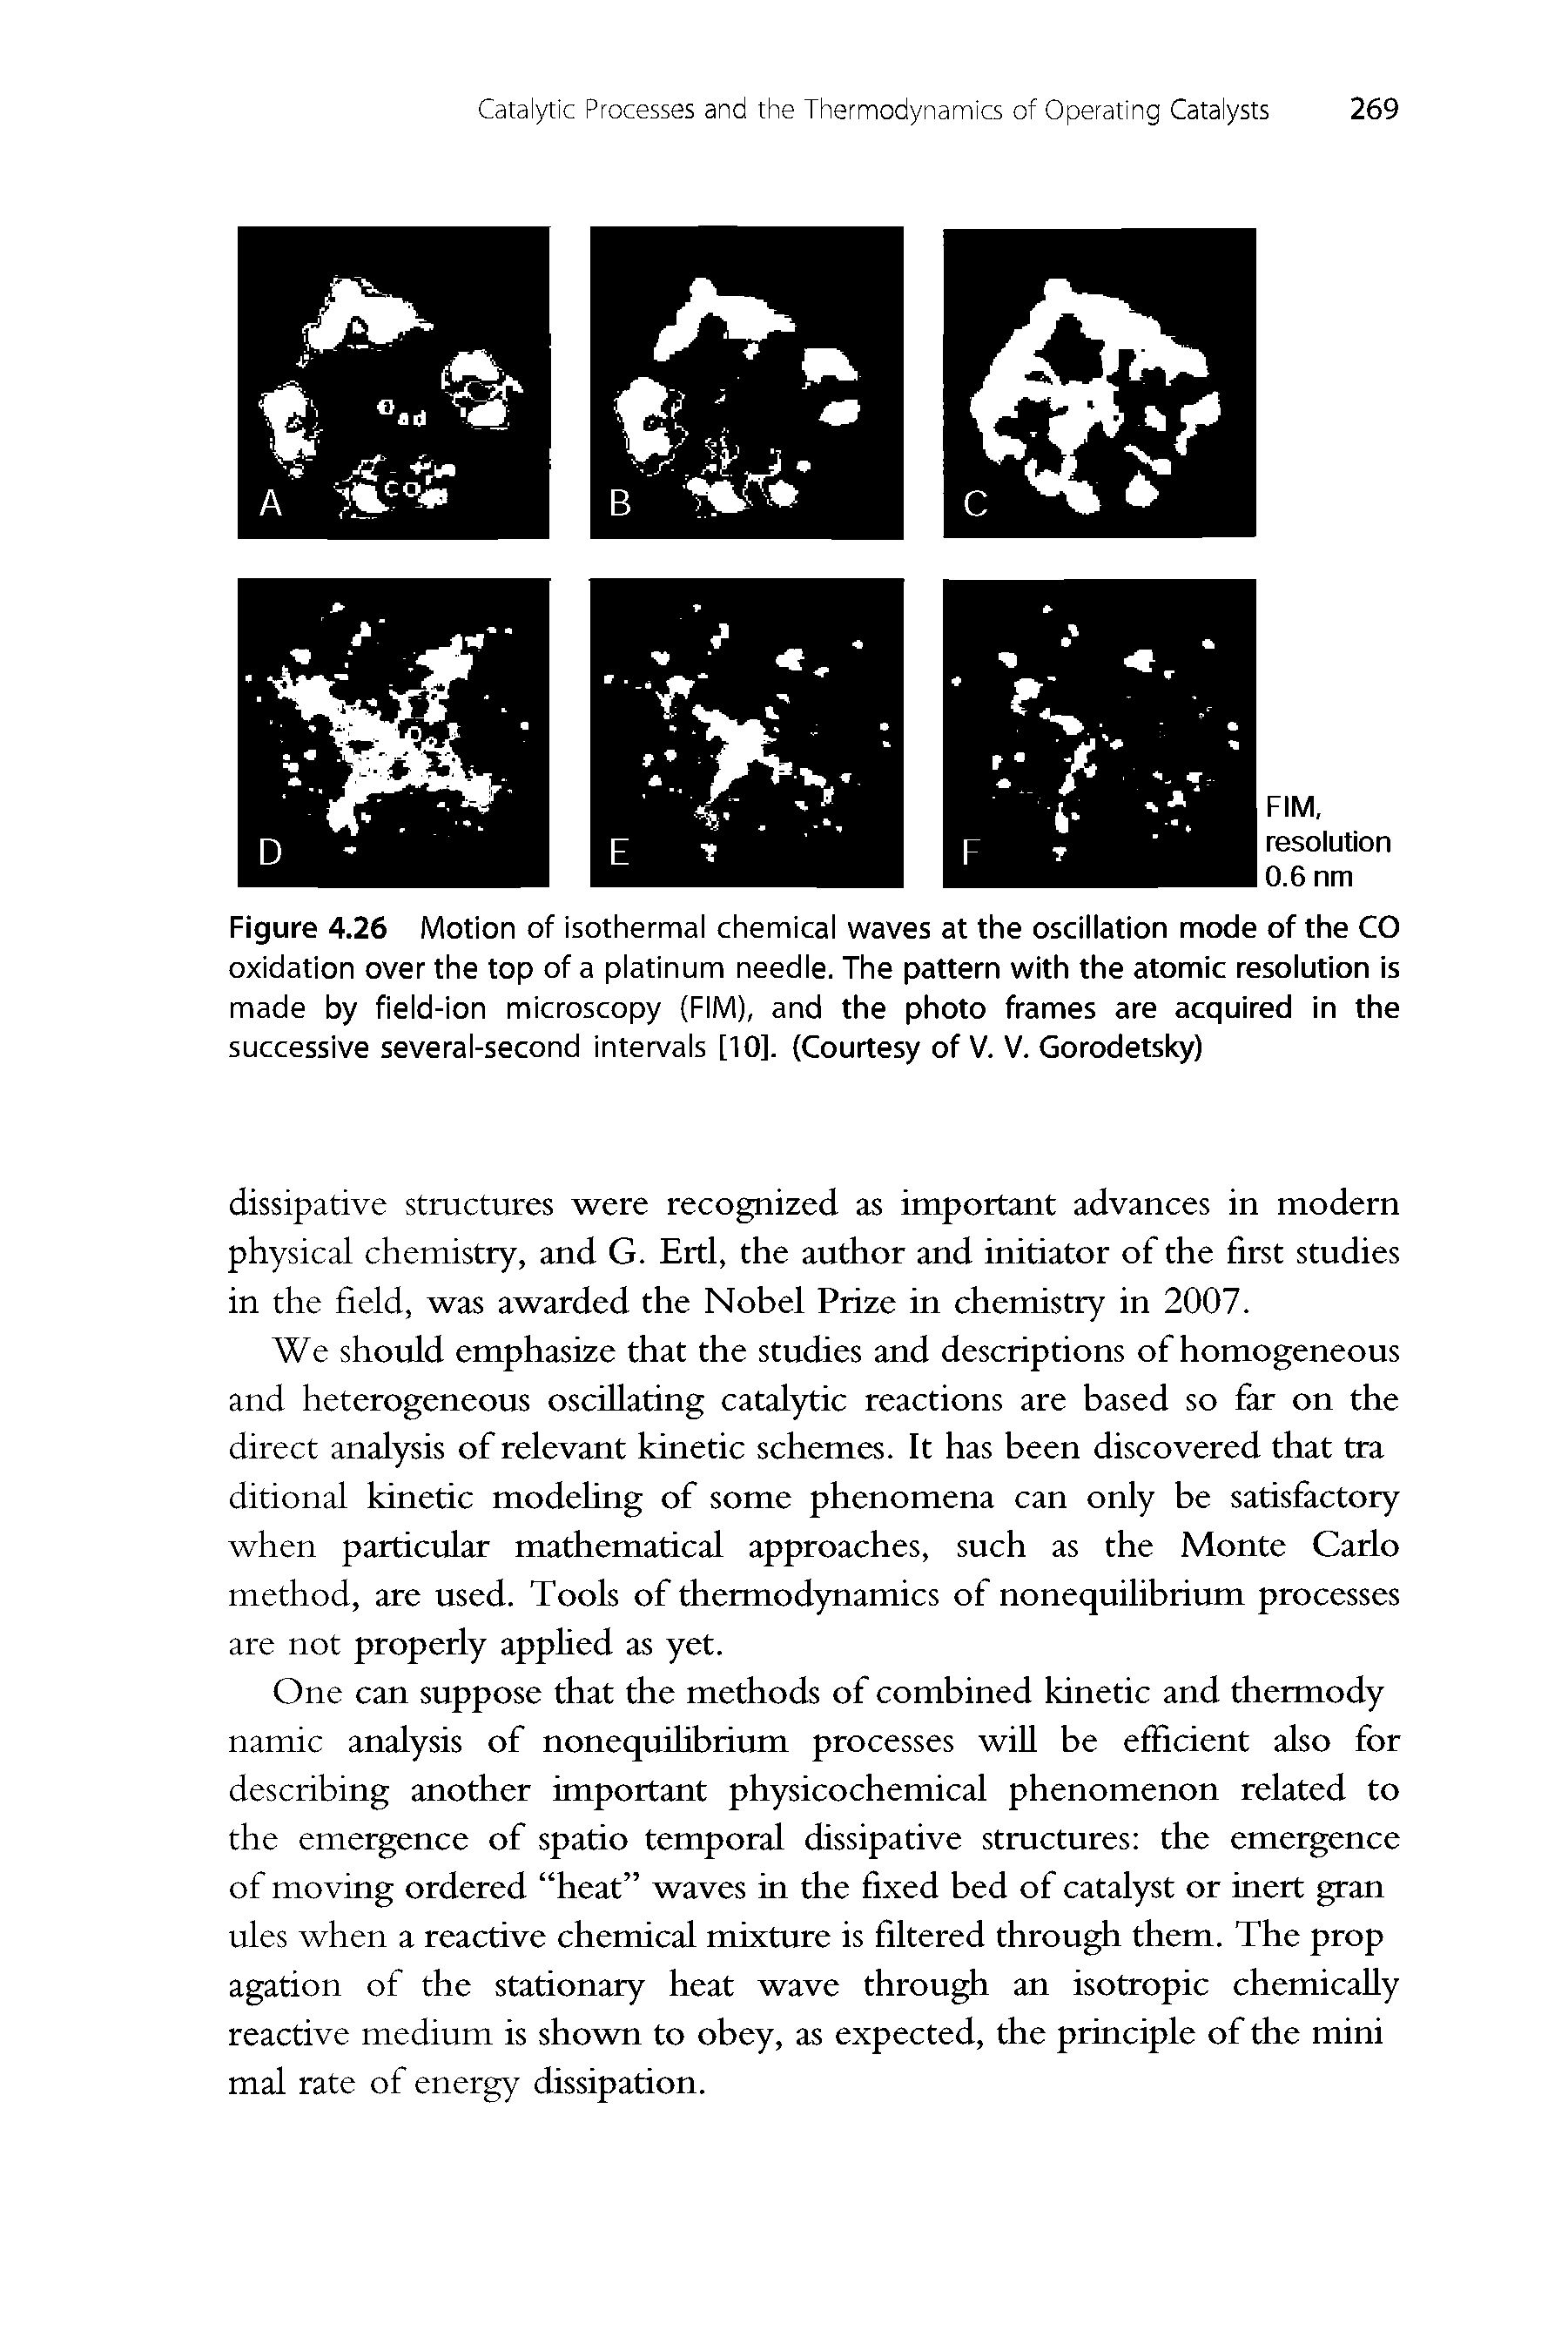 Figure 4.26 Motion of isothermal chemical waves at the oscillation mode of the CO oxidation over the top of a platinum needle. The pattern with the atomic resolution is made by field-ion microscopy (FIM), and the photo frames are acquired in the successive several-second intervals [10]. (Courtesy of V. V. Gorodetsky)...